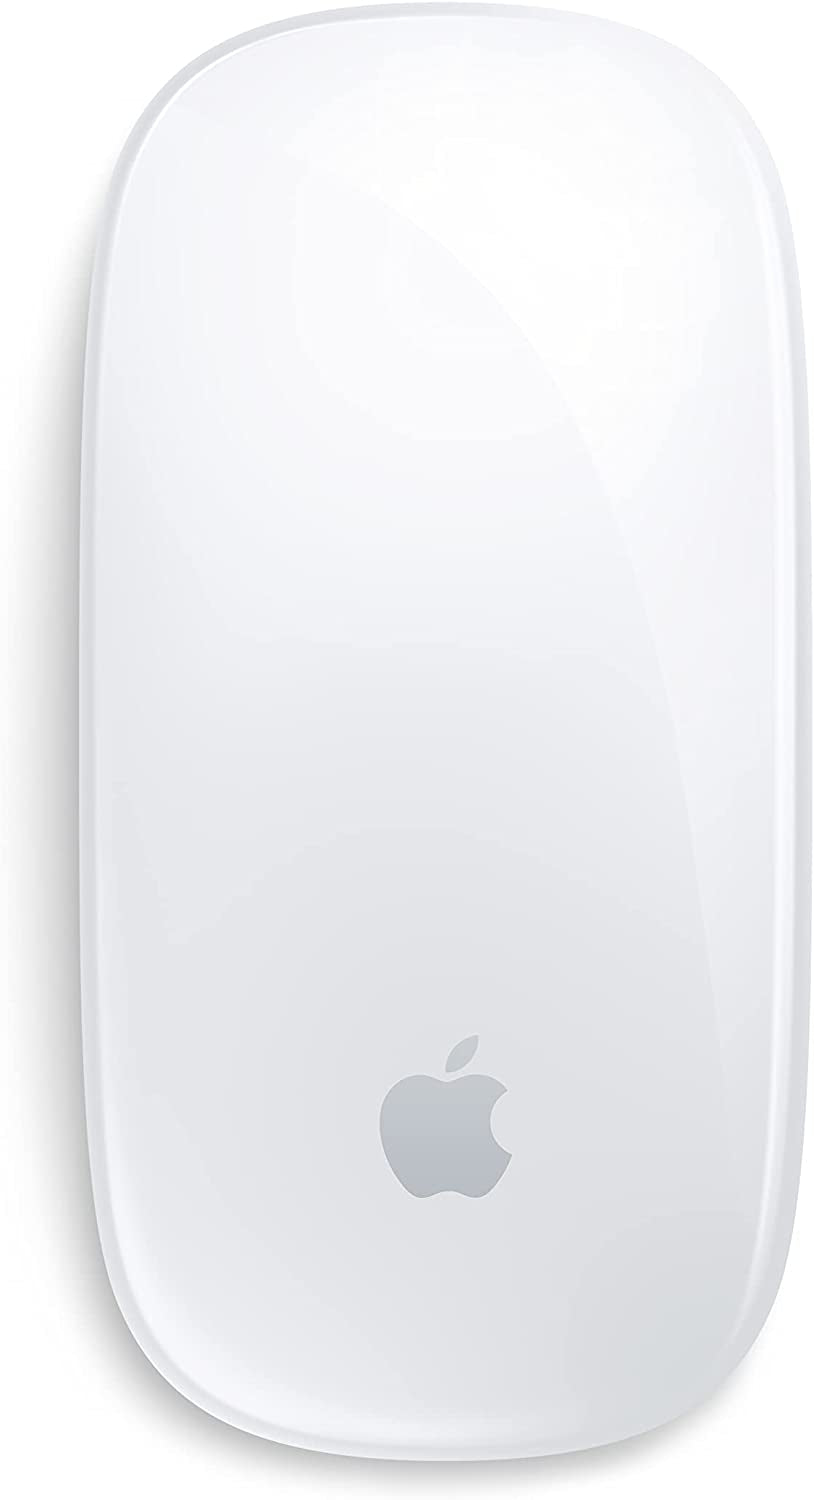 Magic Mouse: Wireless, Bluetooth, Rechargeable. Works with Mac or Ipad; Multi-Touch Surface - White - Growing Apex Tech